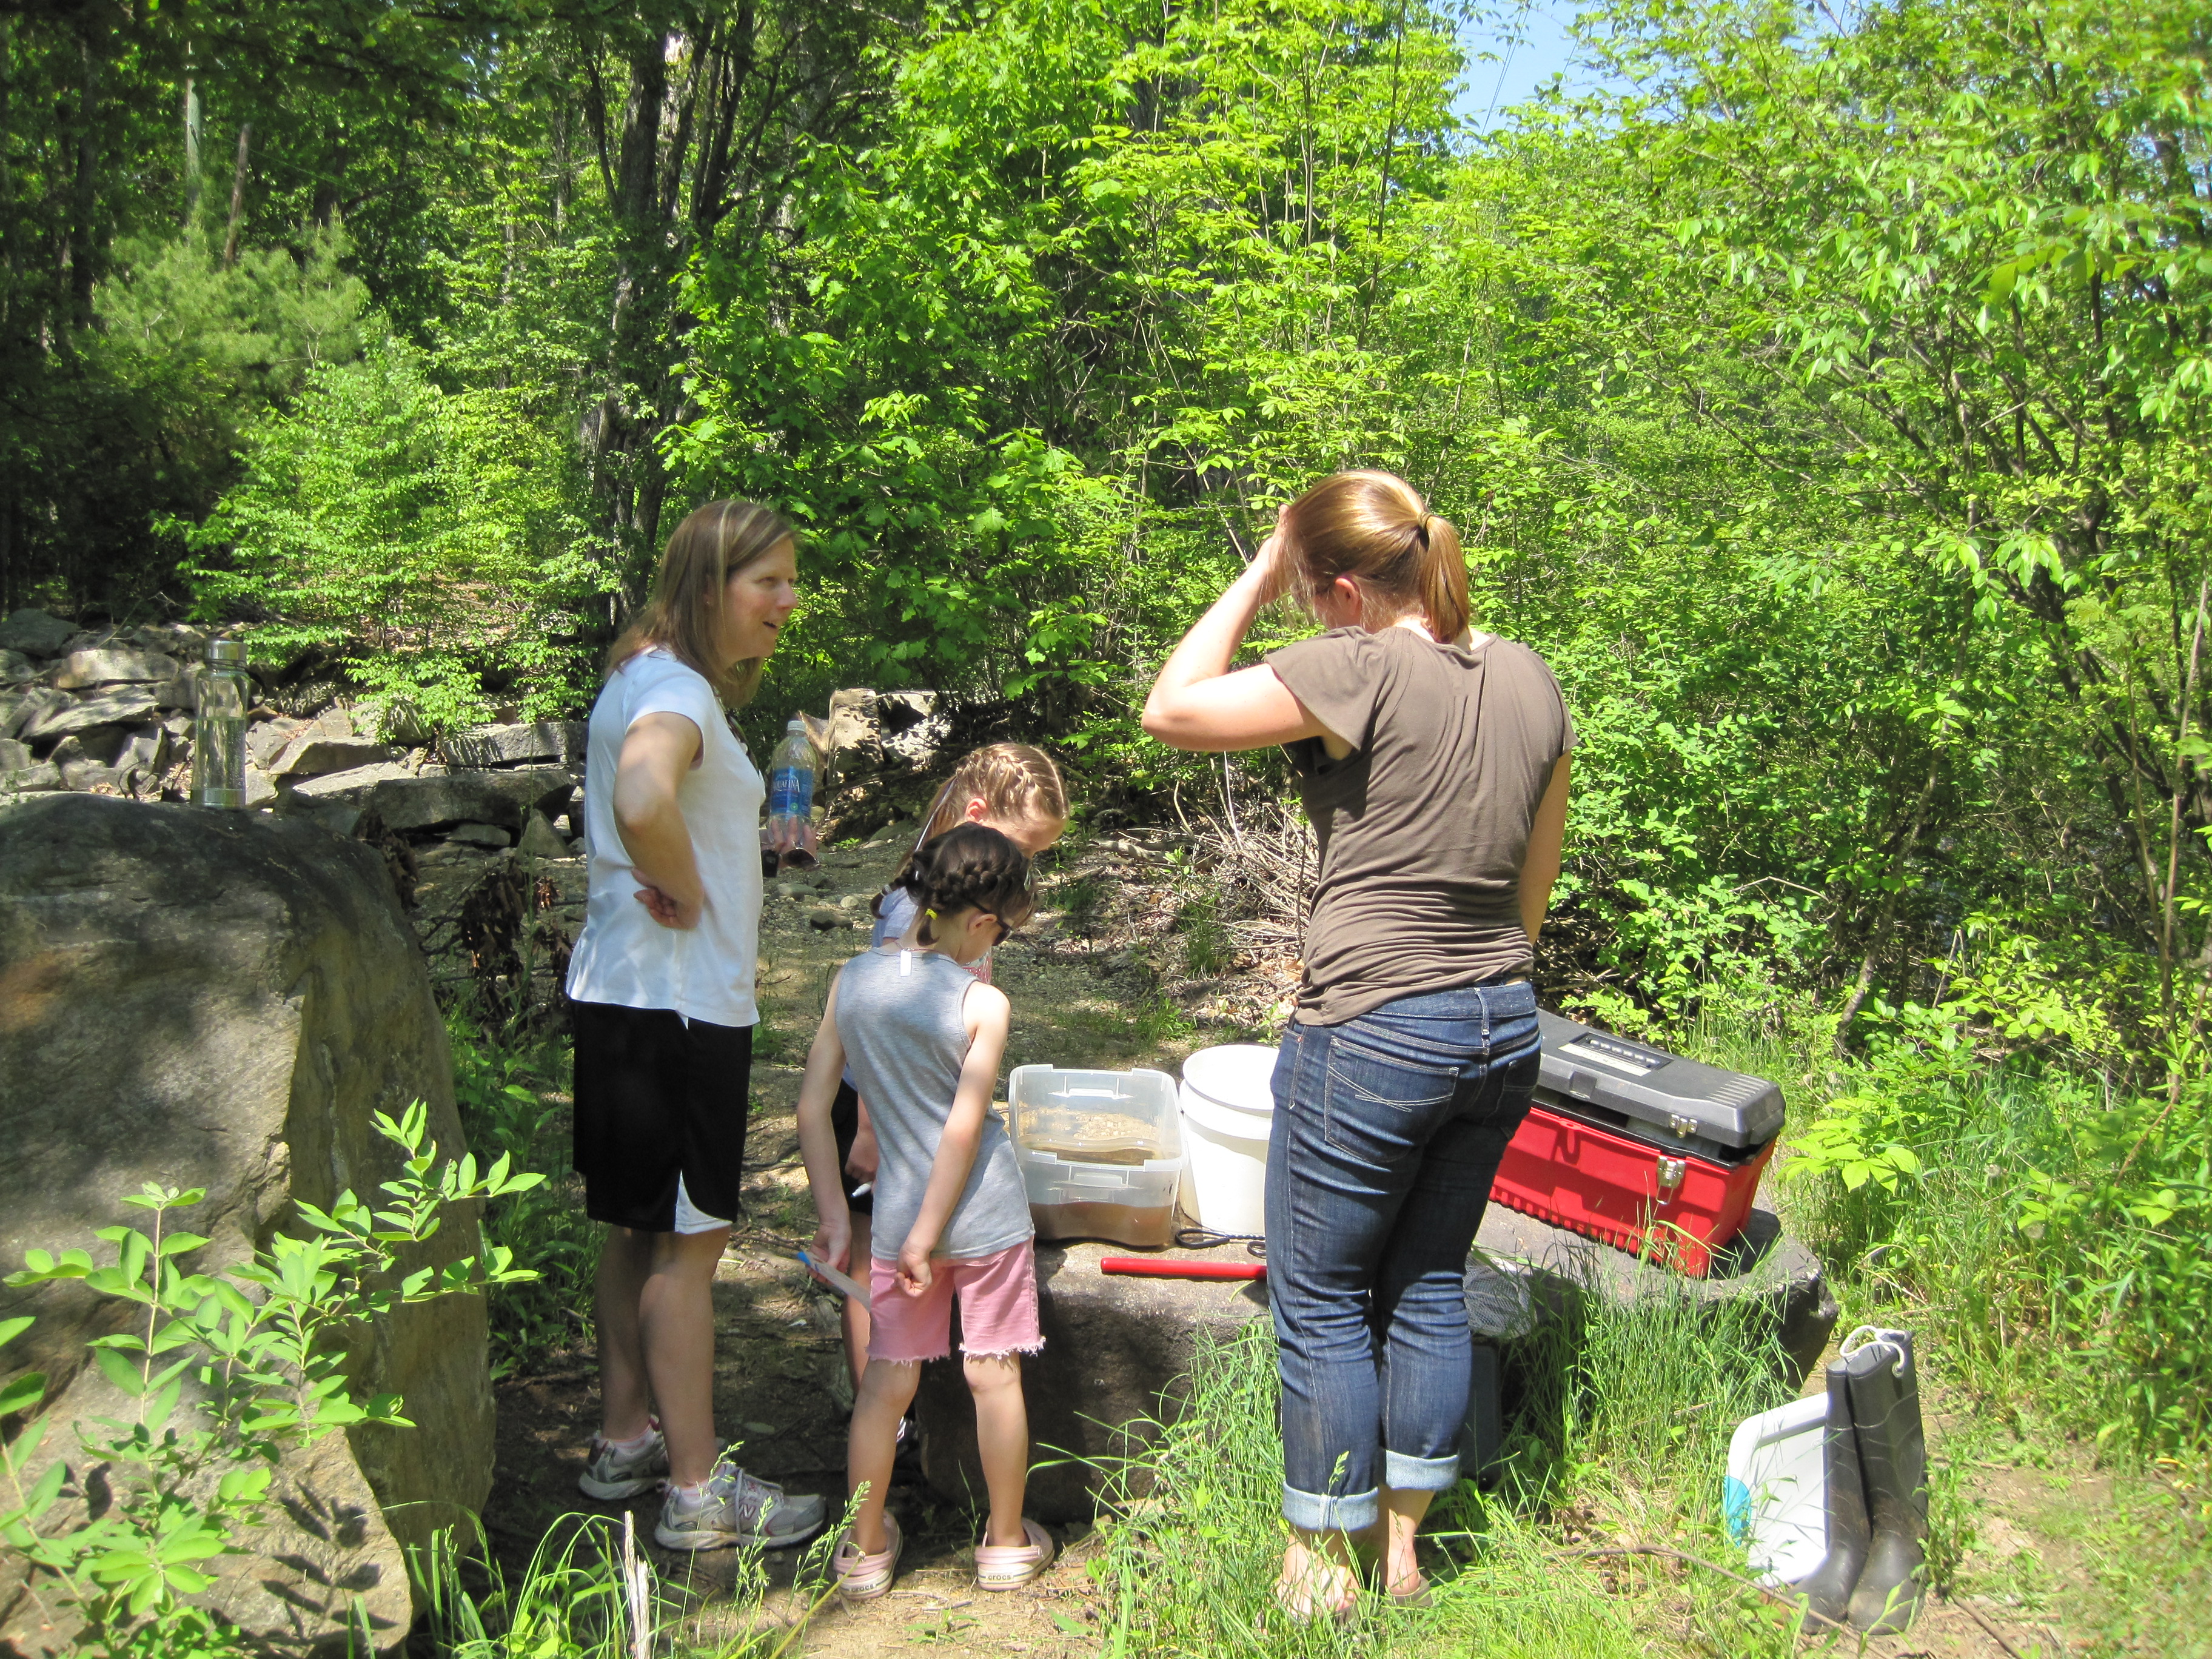 A group of 2 women and 2 children are standing along a bank on the Lamprey River. The group has an assortment of buckets and containers sitting on rocks.